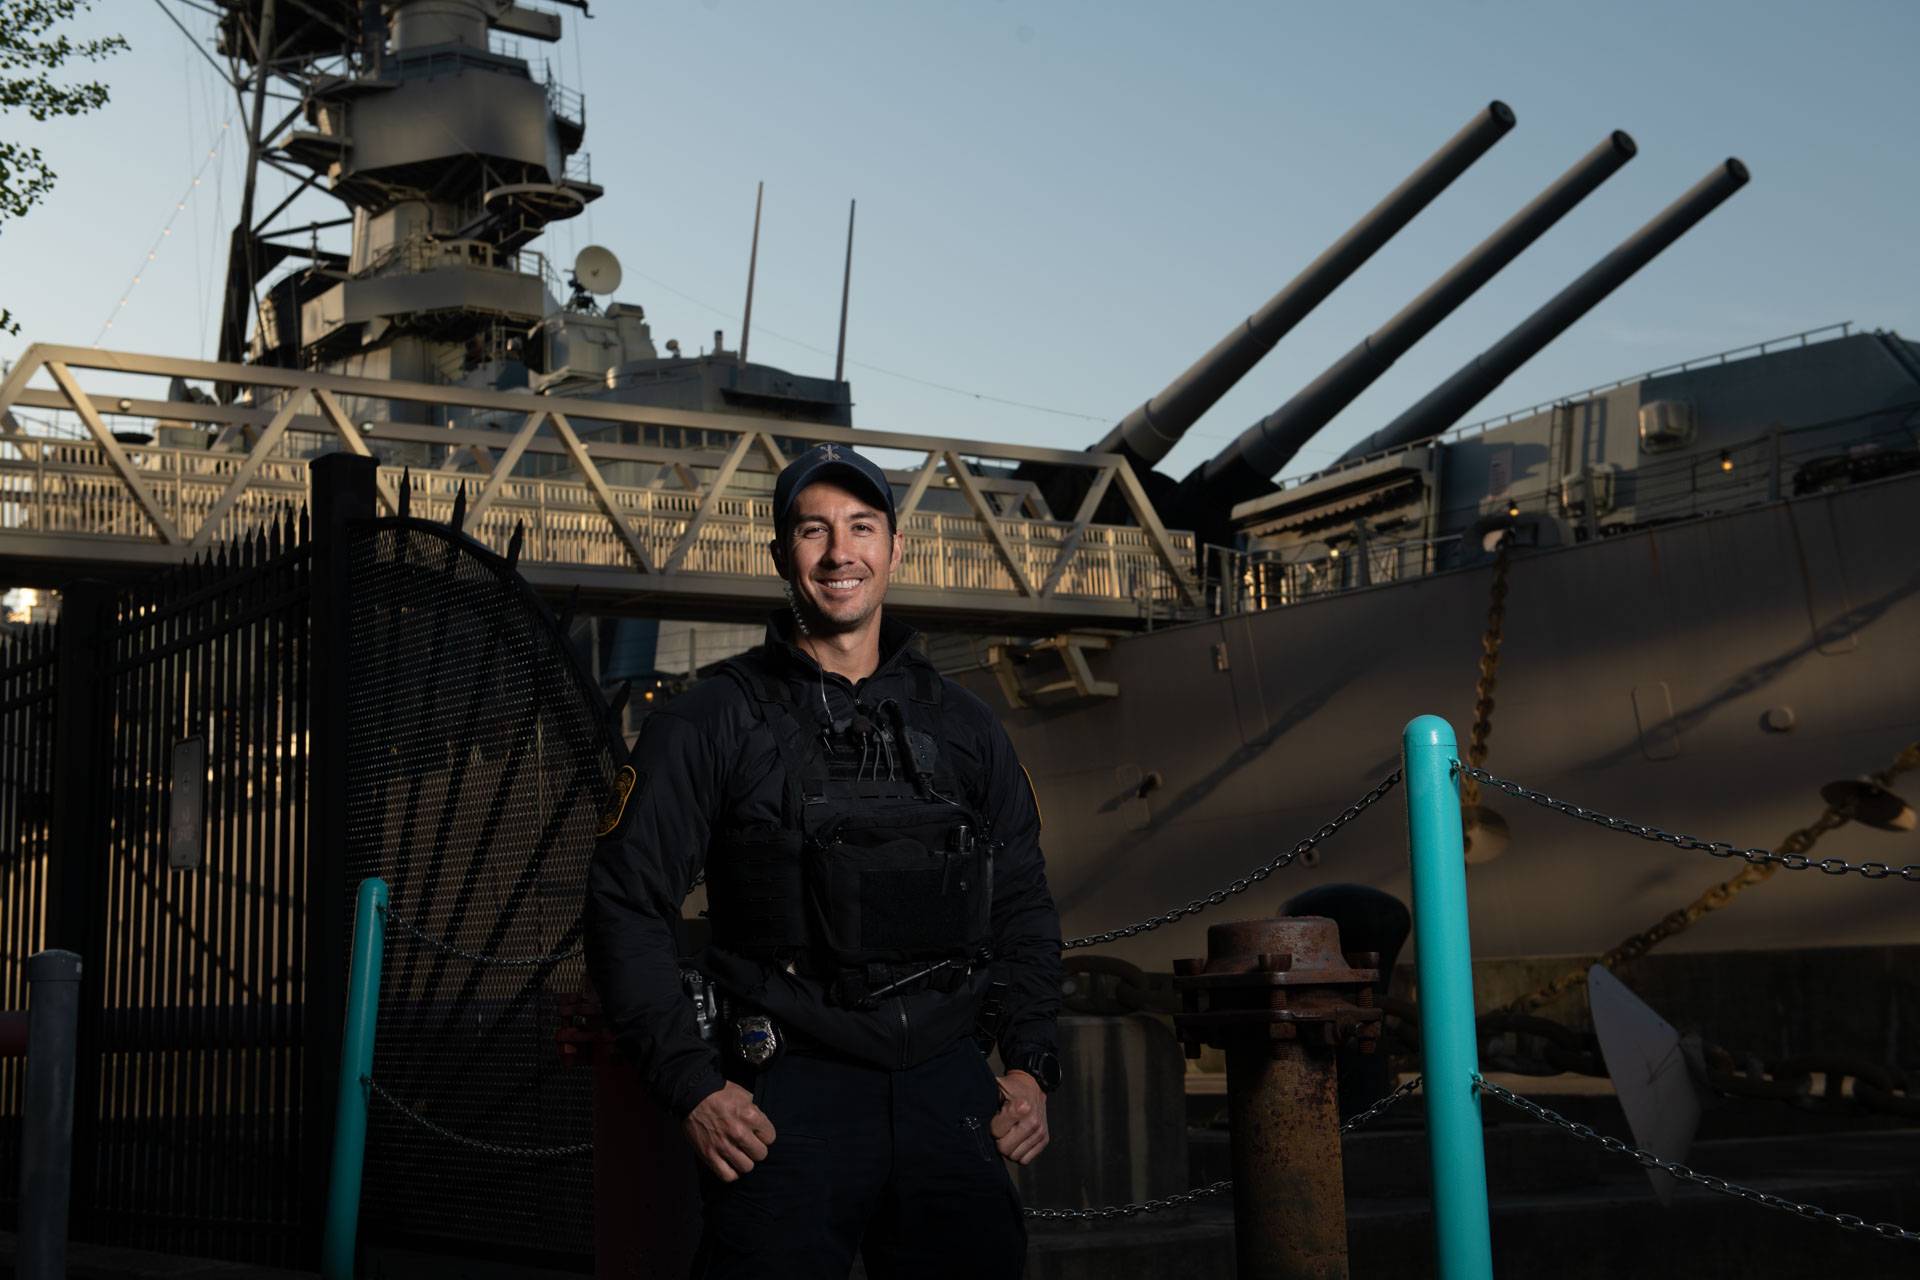 Police Officer in front of Naval ship